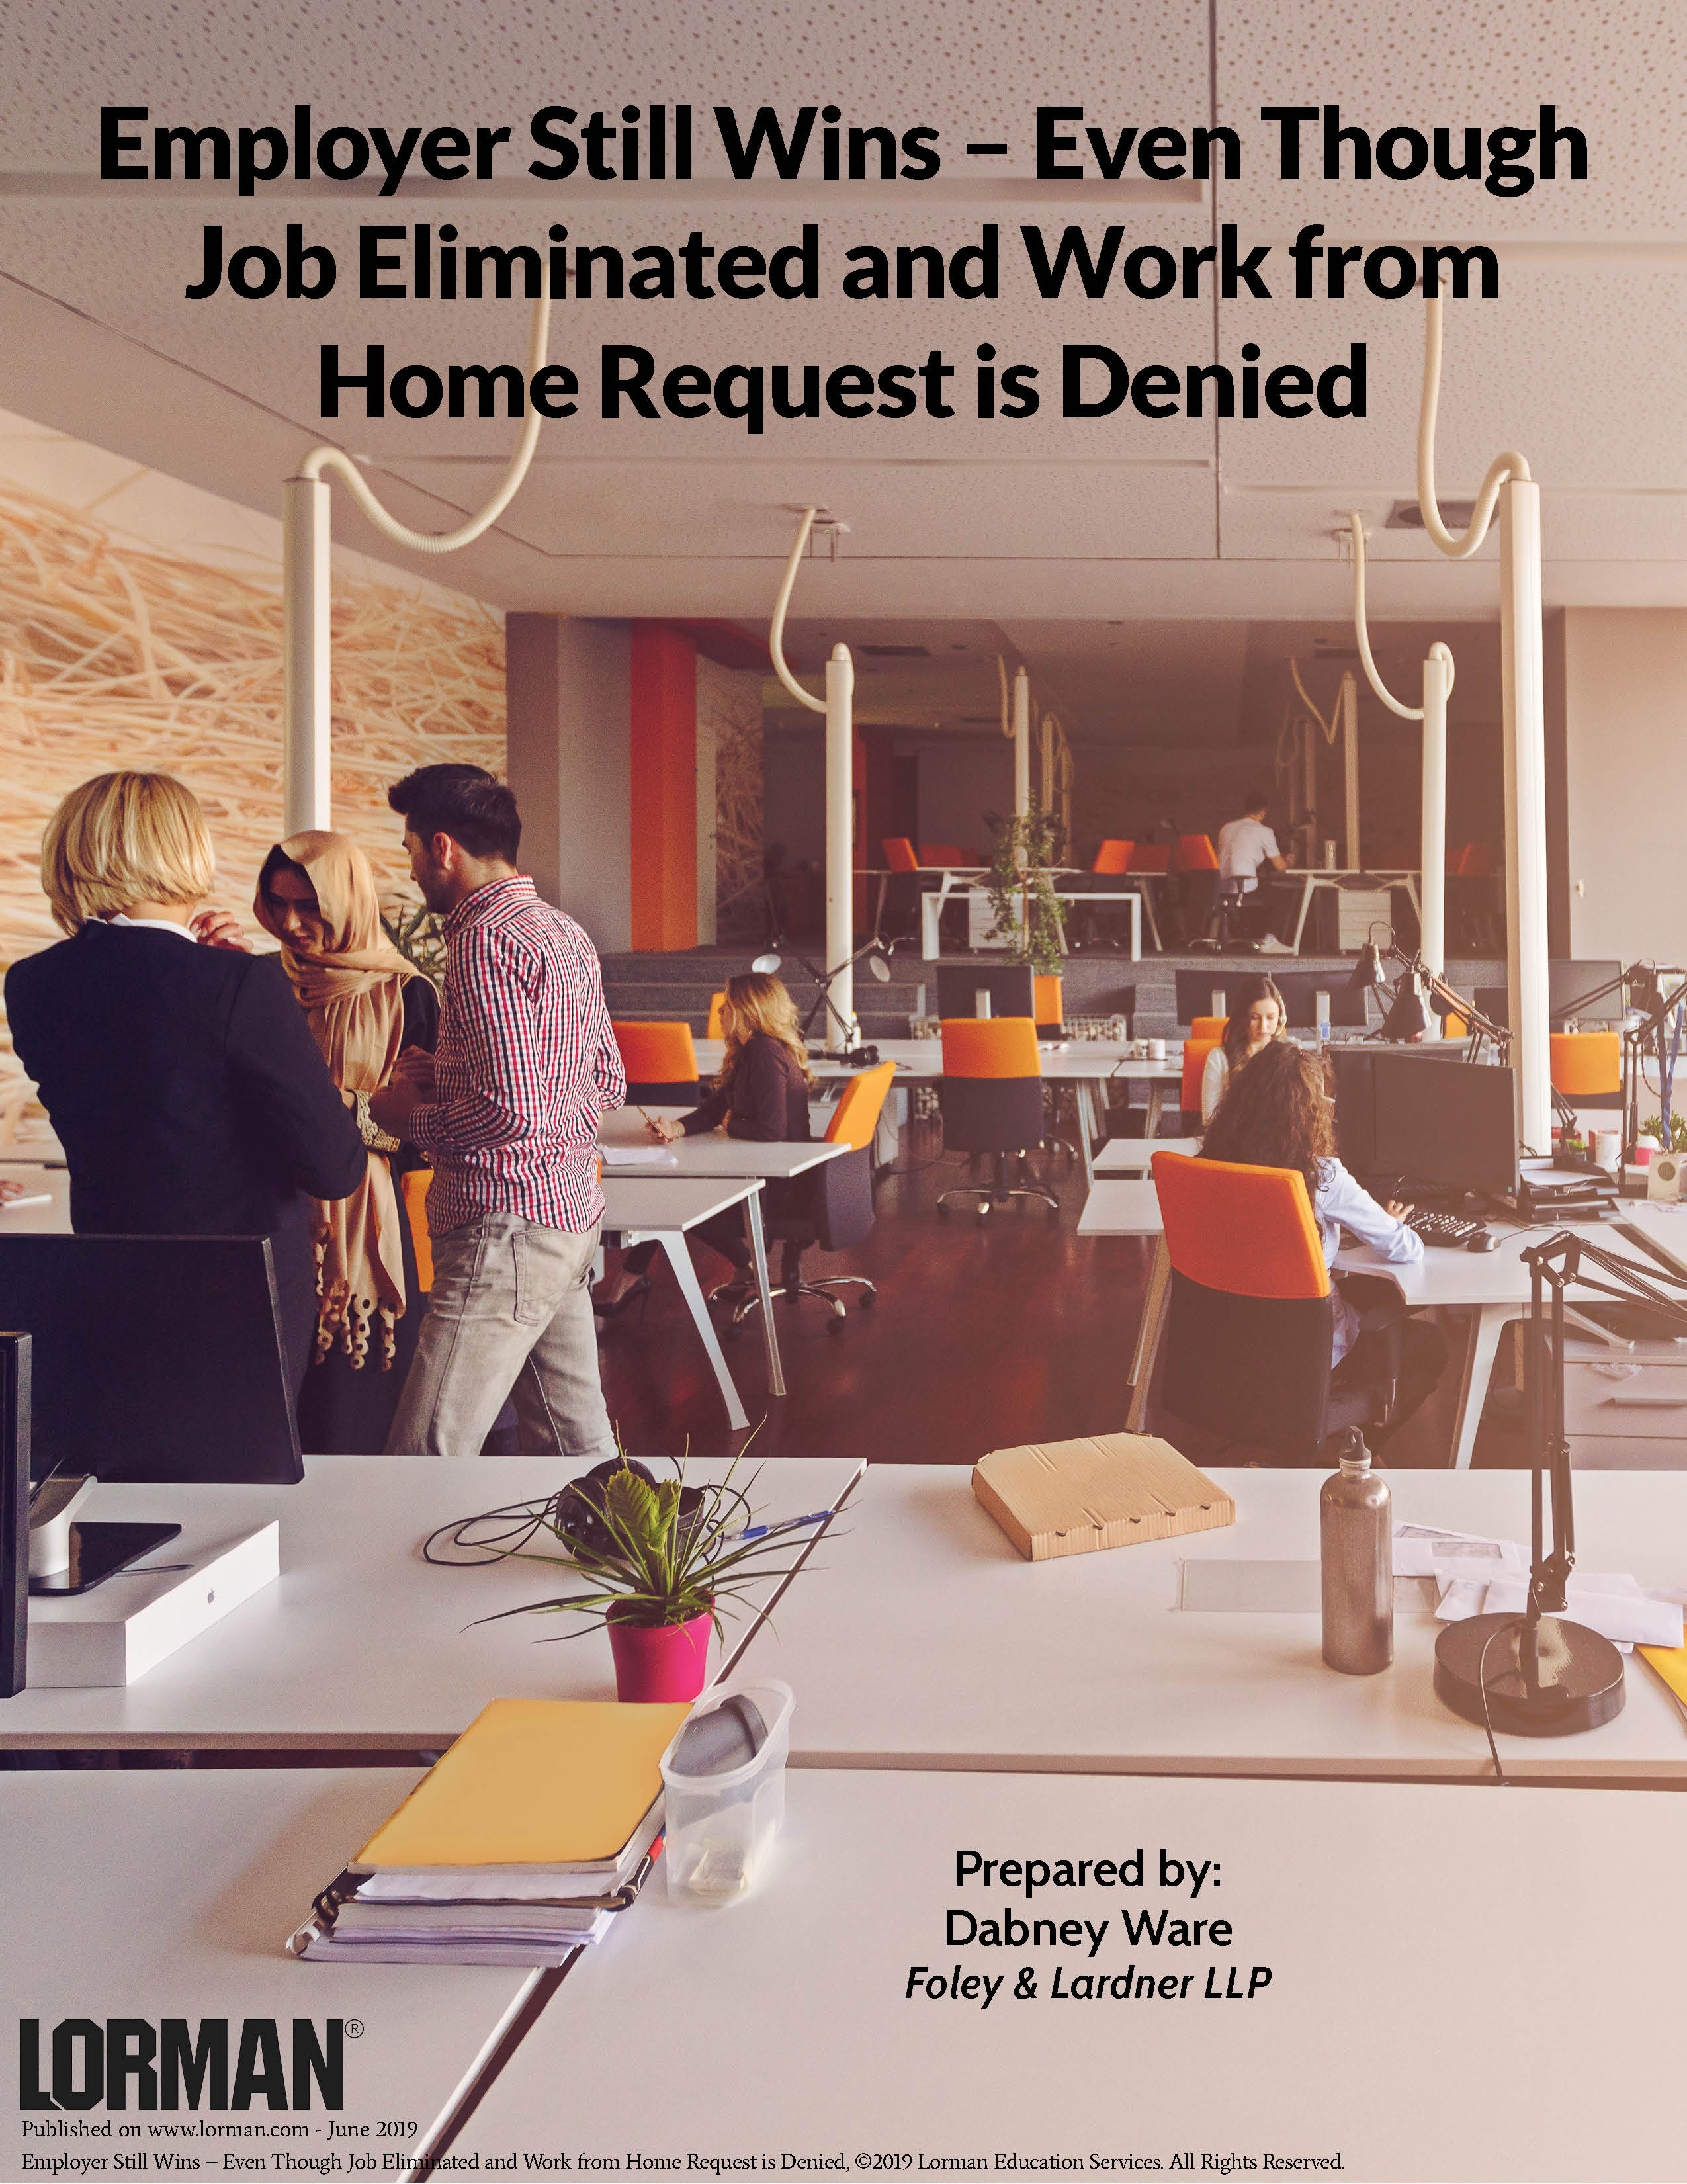 Employer Still Wins – Even Though Job Eliminated and Work from Home Request is Denied